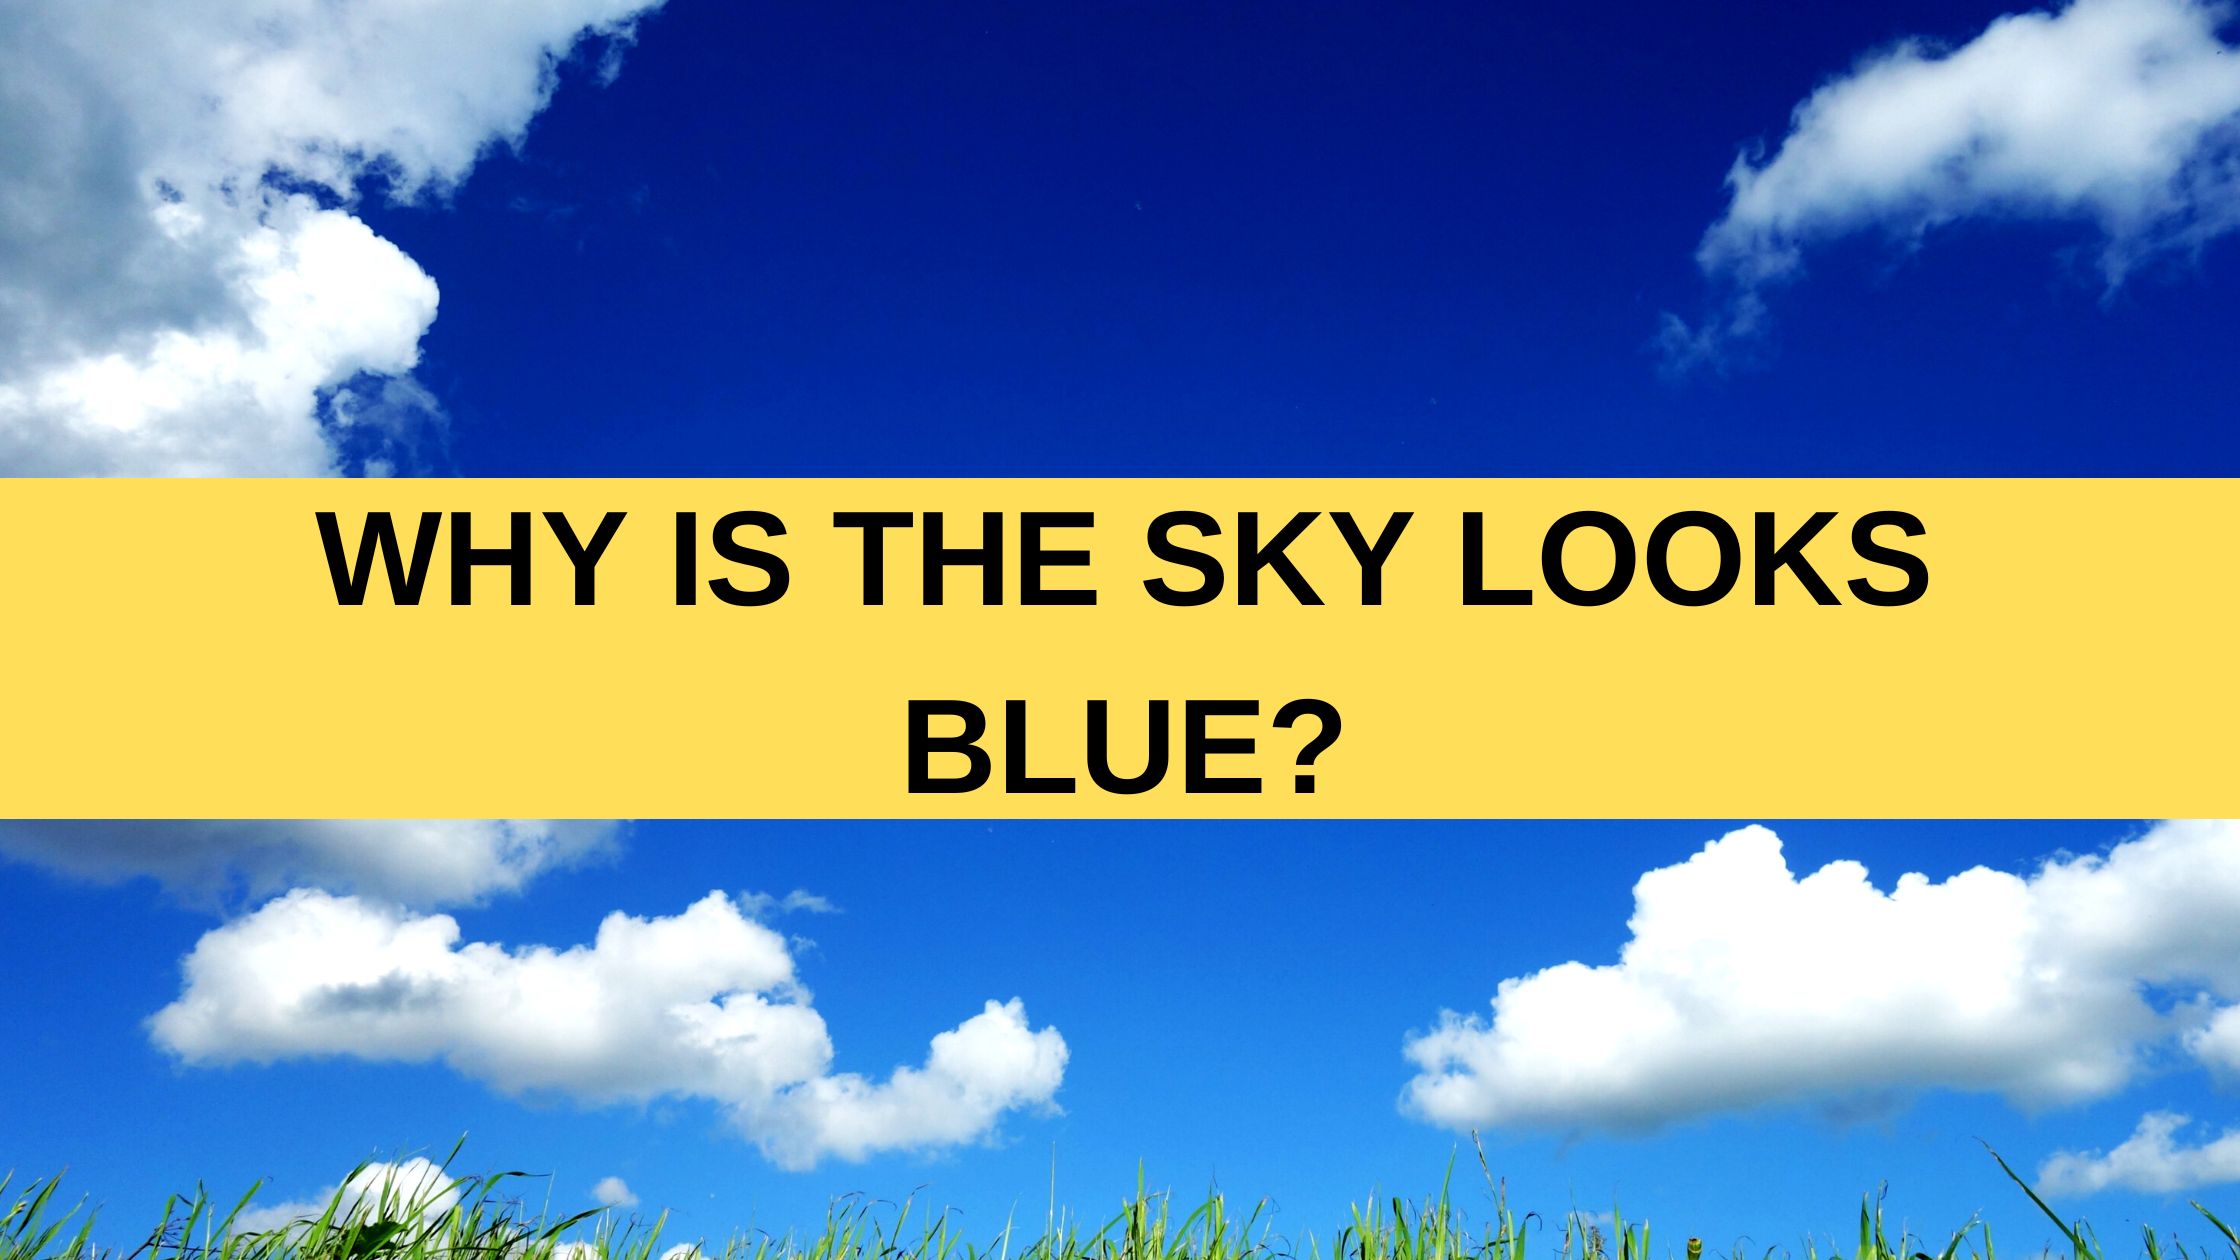 Why is the sky looks blue?